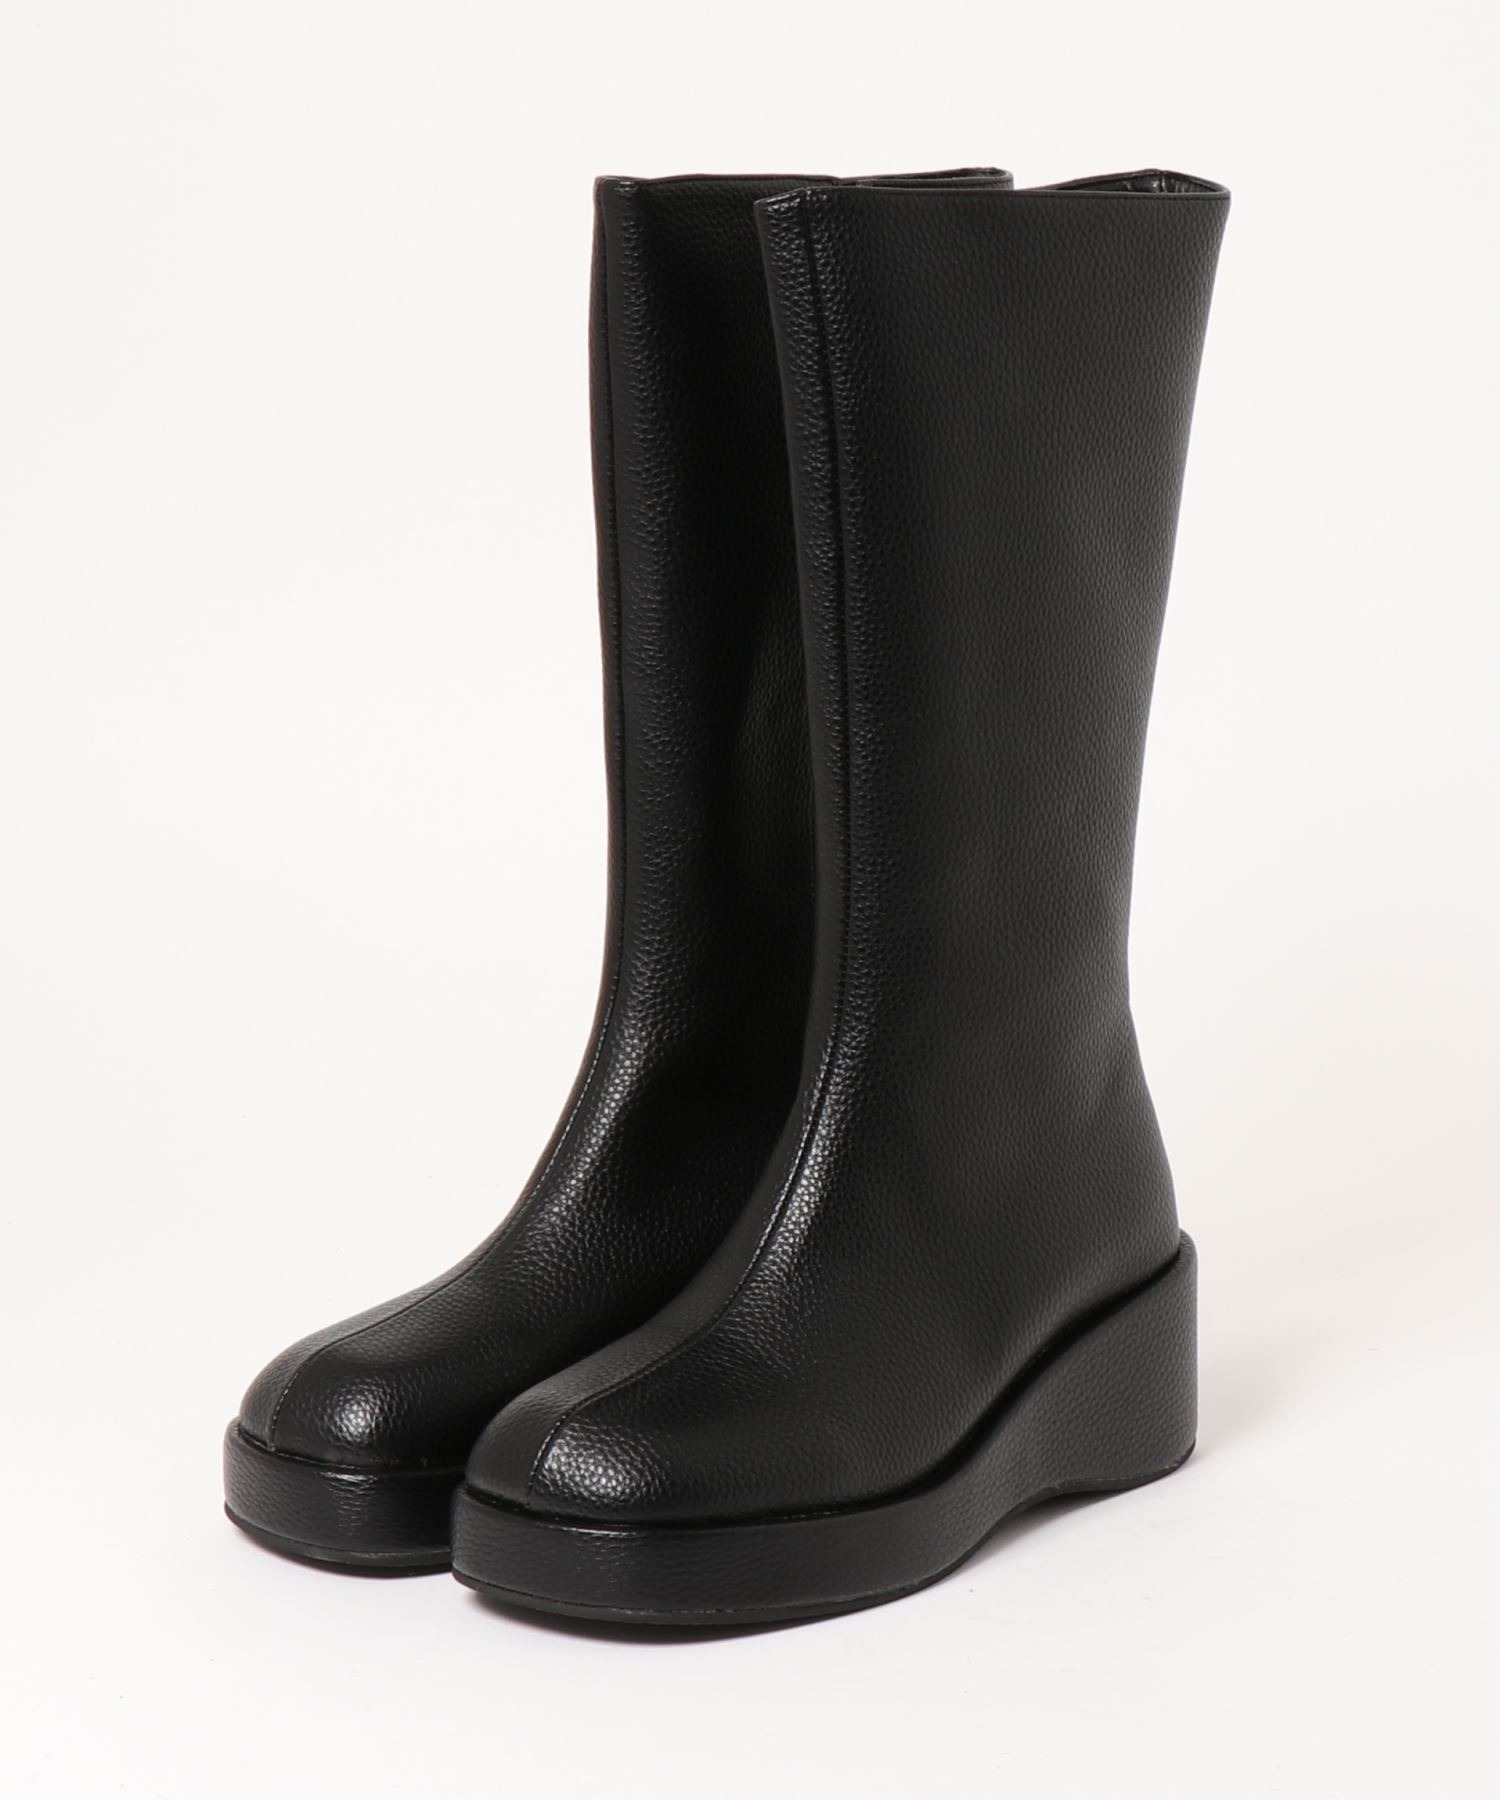 Wedge sole middle boots chs21a049-ファッション通販サイト-chuclla